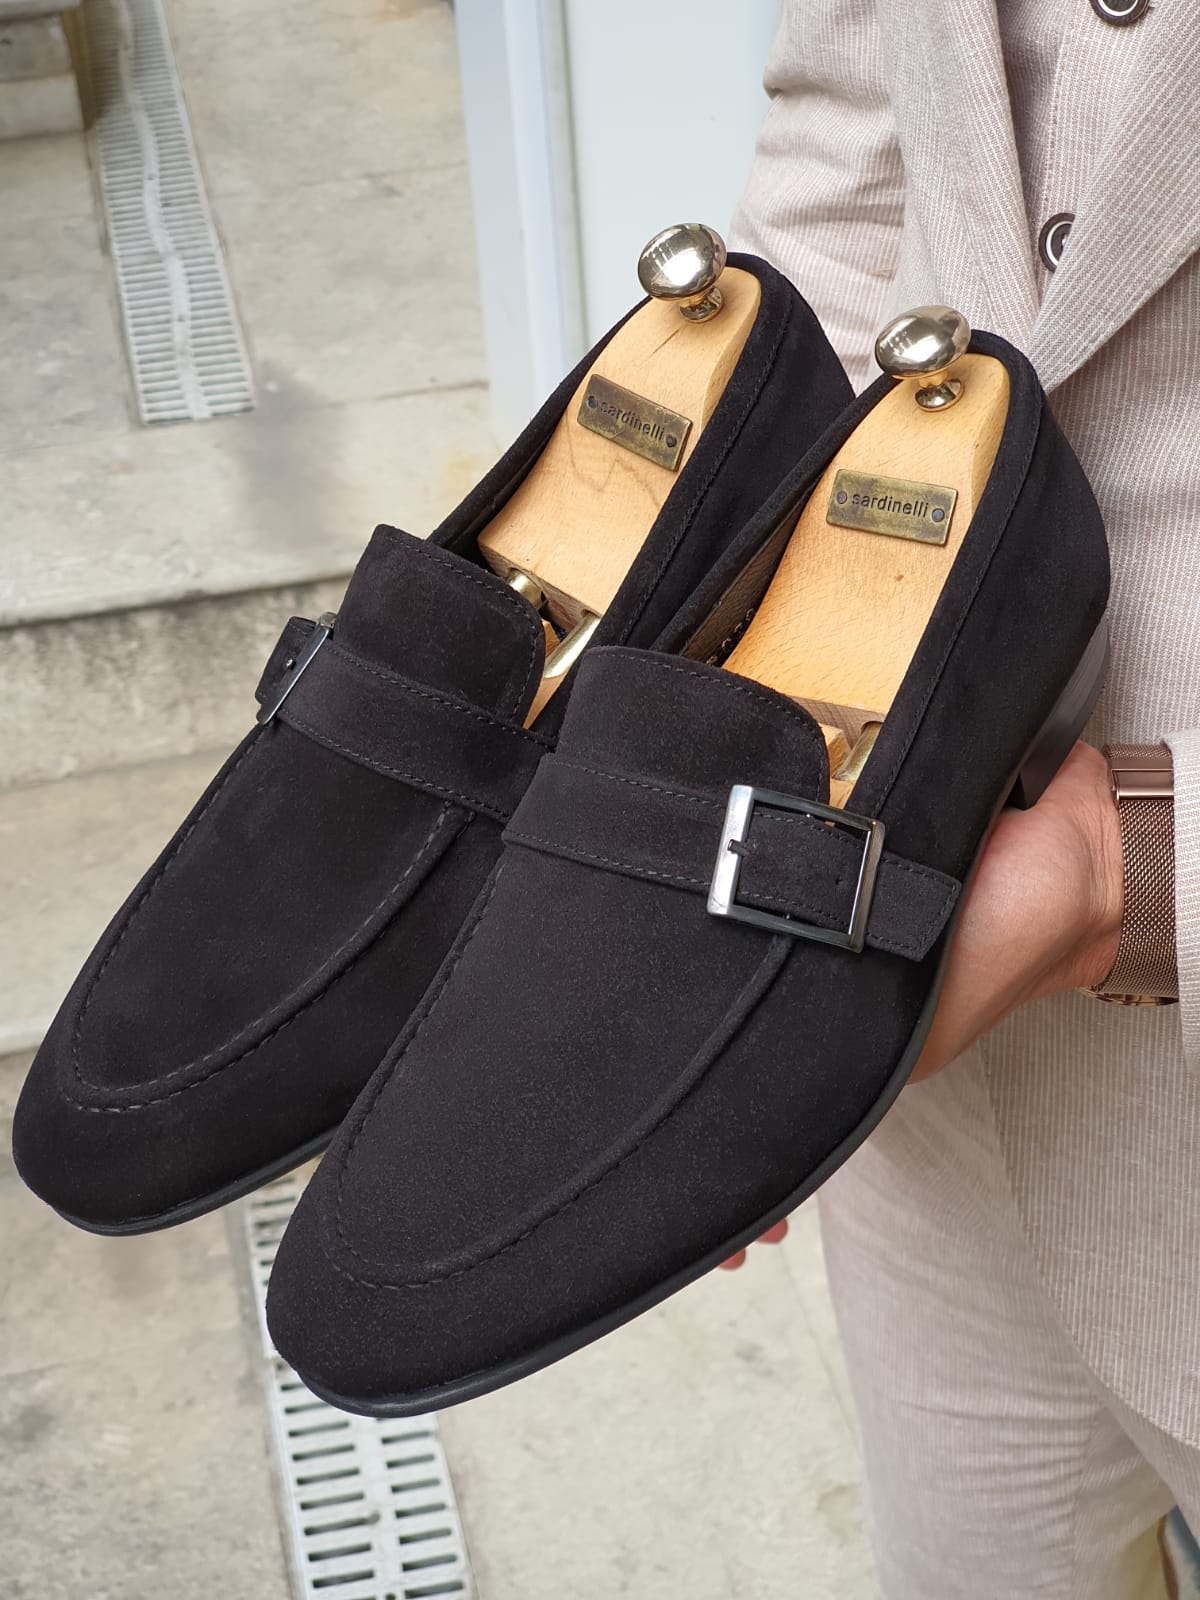 Black Suede Buckle Loafers by Sardinelli | Free Worldwide Shipping